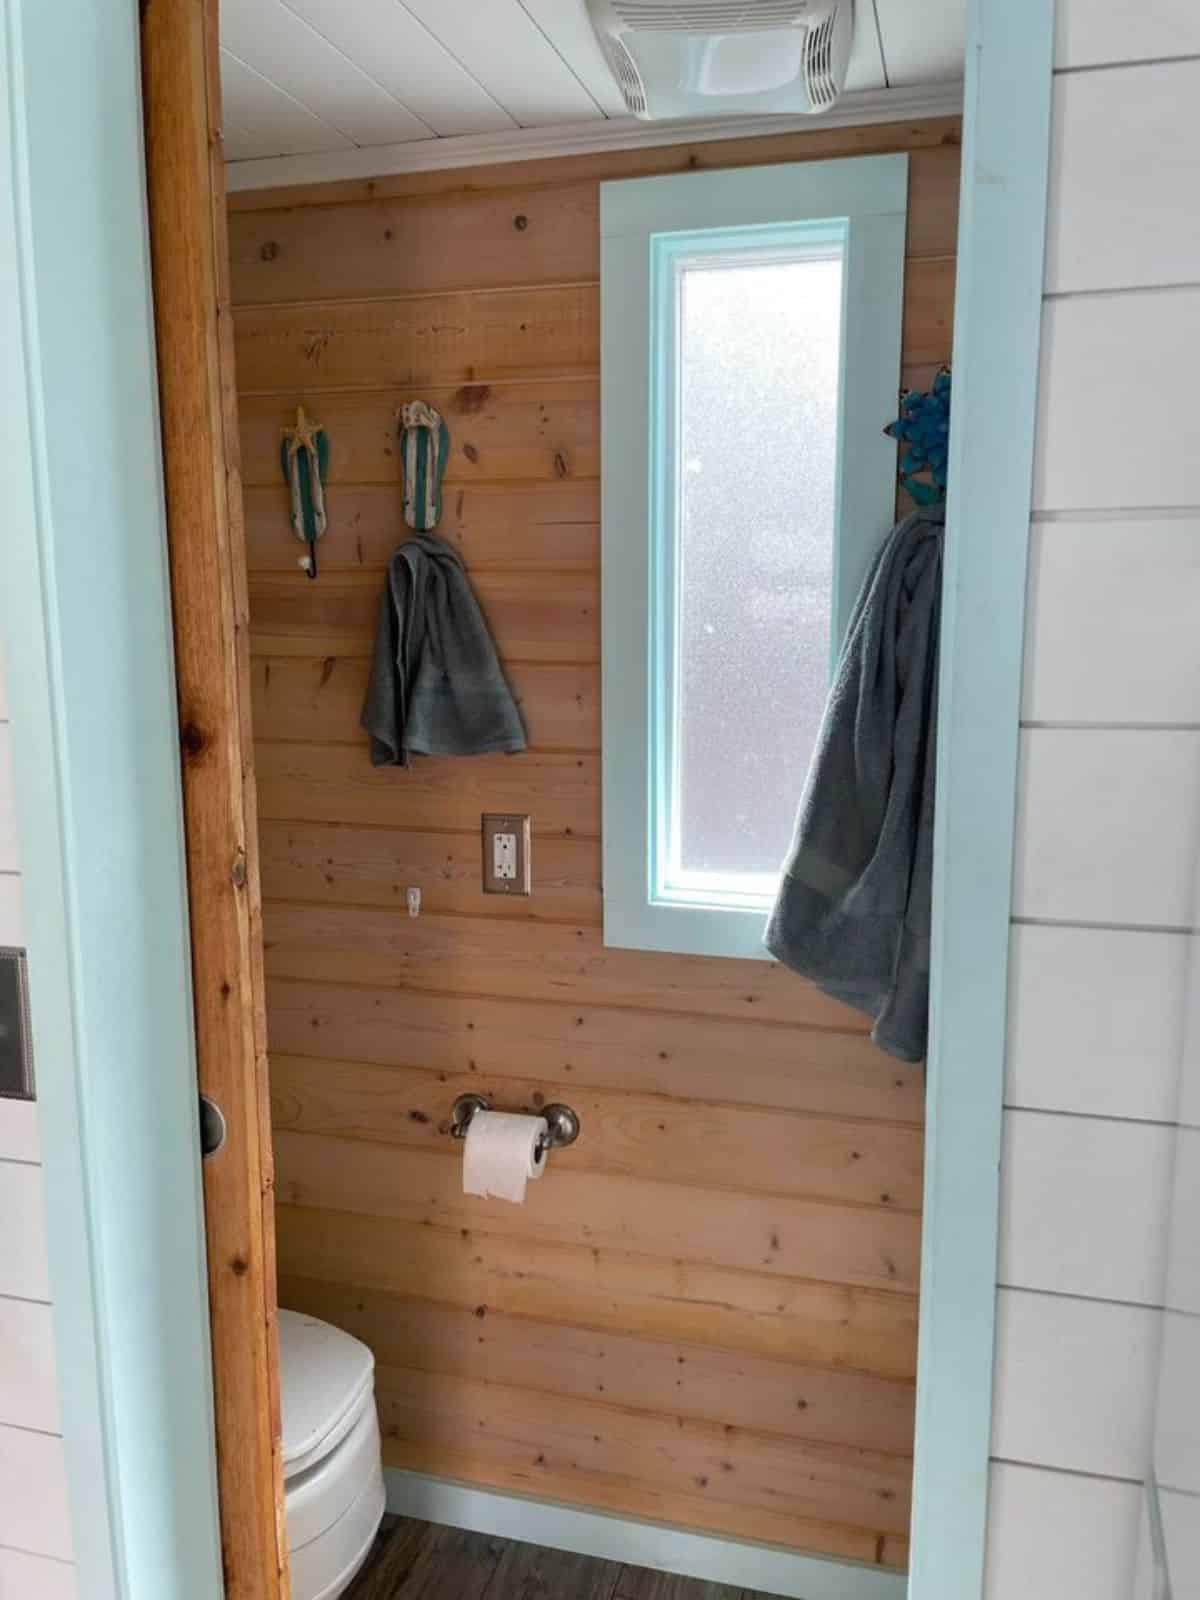 Standard shower and toilet in bathroom of Tiny Beach Cottage